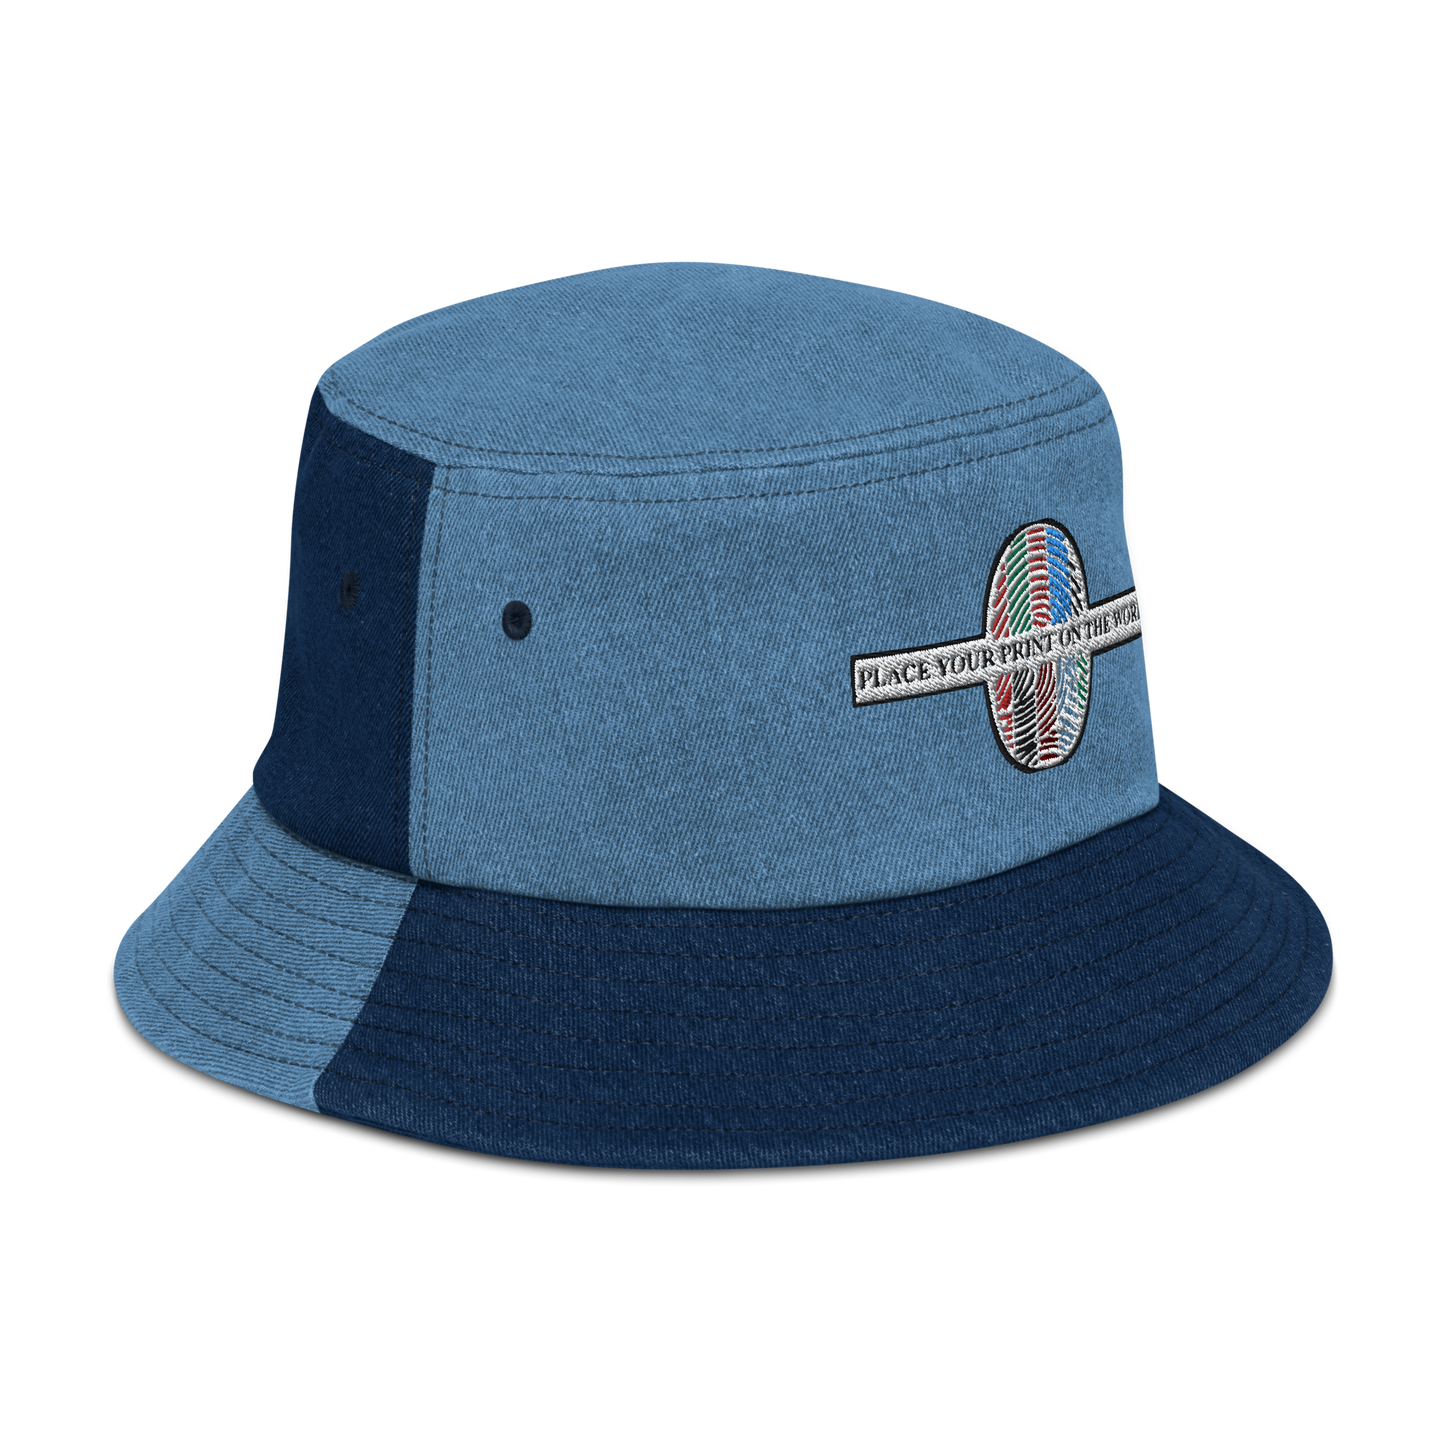 Place Your Print On The World Denim bucket hat